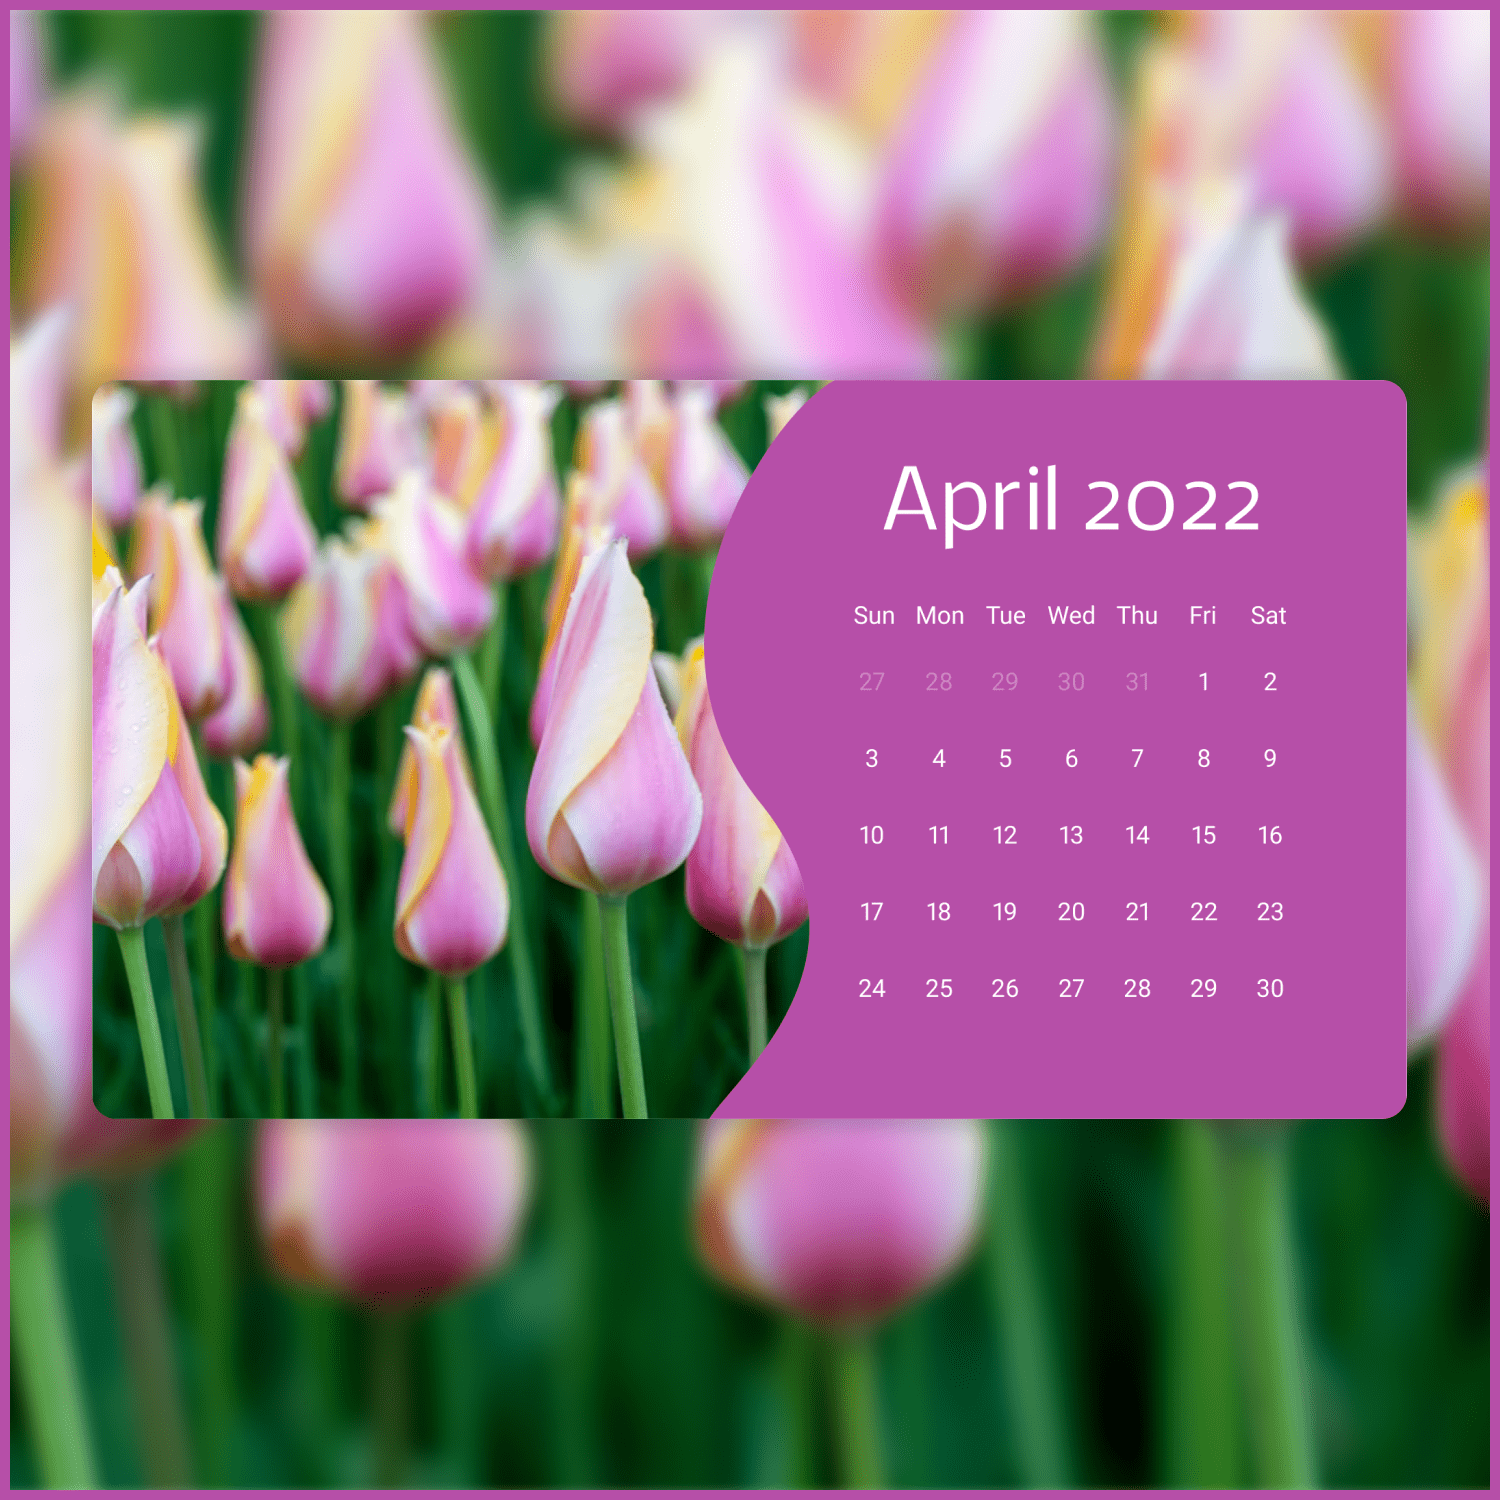 Printable Tender Calendar with a Pink Flower for April 2022 cover.